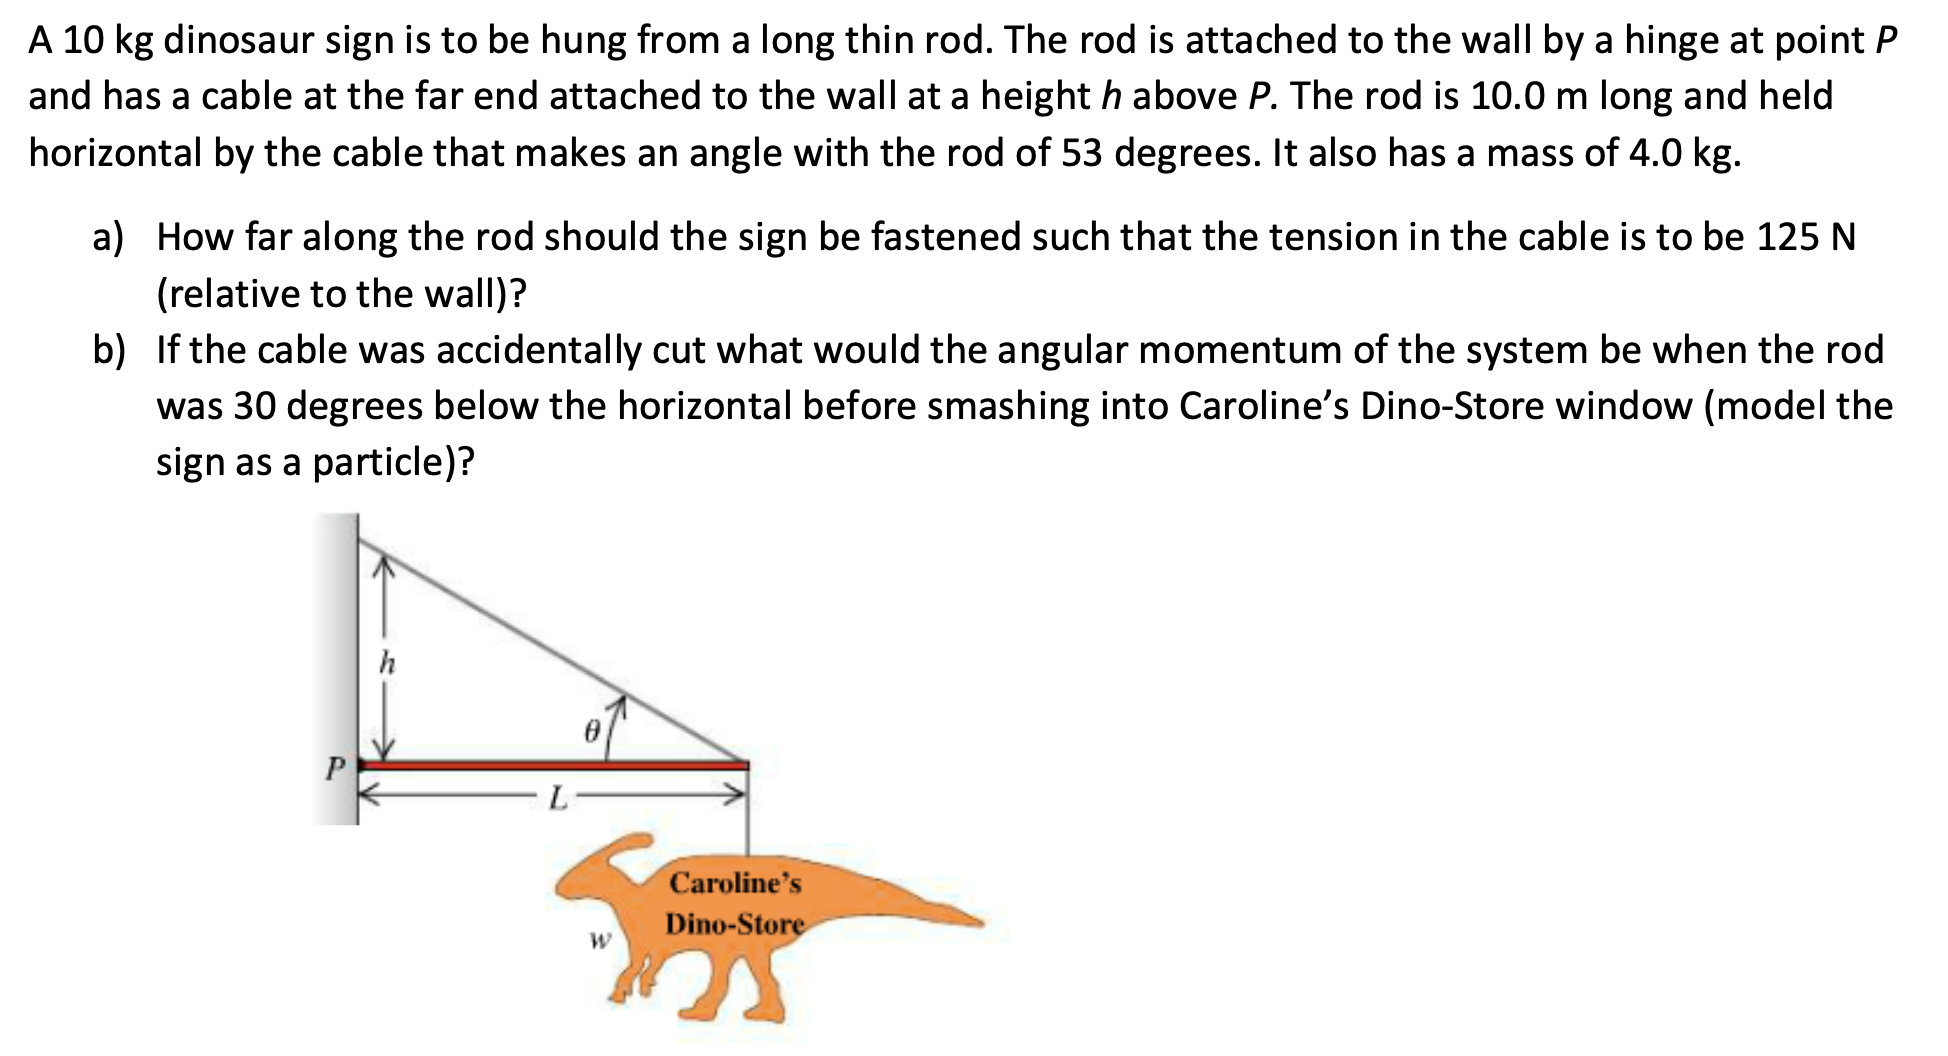 A 10 kg dinosaur sign is to be hung from a long thin rod. The rod is attached to the wall by a hinge at point P
and has a cable at the far end attached to the wall at a height h above P. The rod is 10.0 m long and held
horizontal by the cable that makes an angle with the rod of 53 degrees. It also has a mass of 4.0 kg.
a) How far along the rod should the sign be fastened such that the tension in the cable is to be 125 N
(relative to the wall)?
b) If the cable was accidentally cut what would the angular momentum of the system be when the rod
was 30 degrees below the horizontal before smashing into Caroline's Dino-Store window (model the
sign as a particle)?
h
P
L.
Caroline's
Dino-Store
